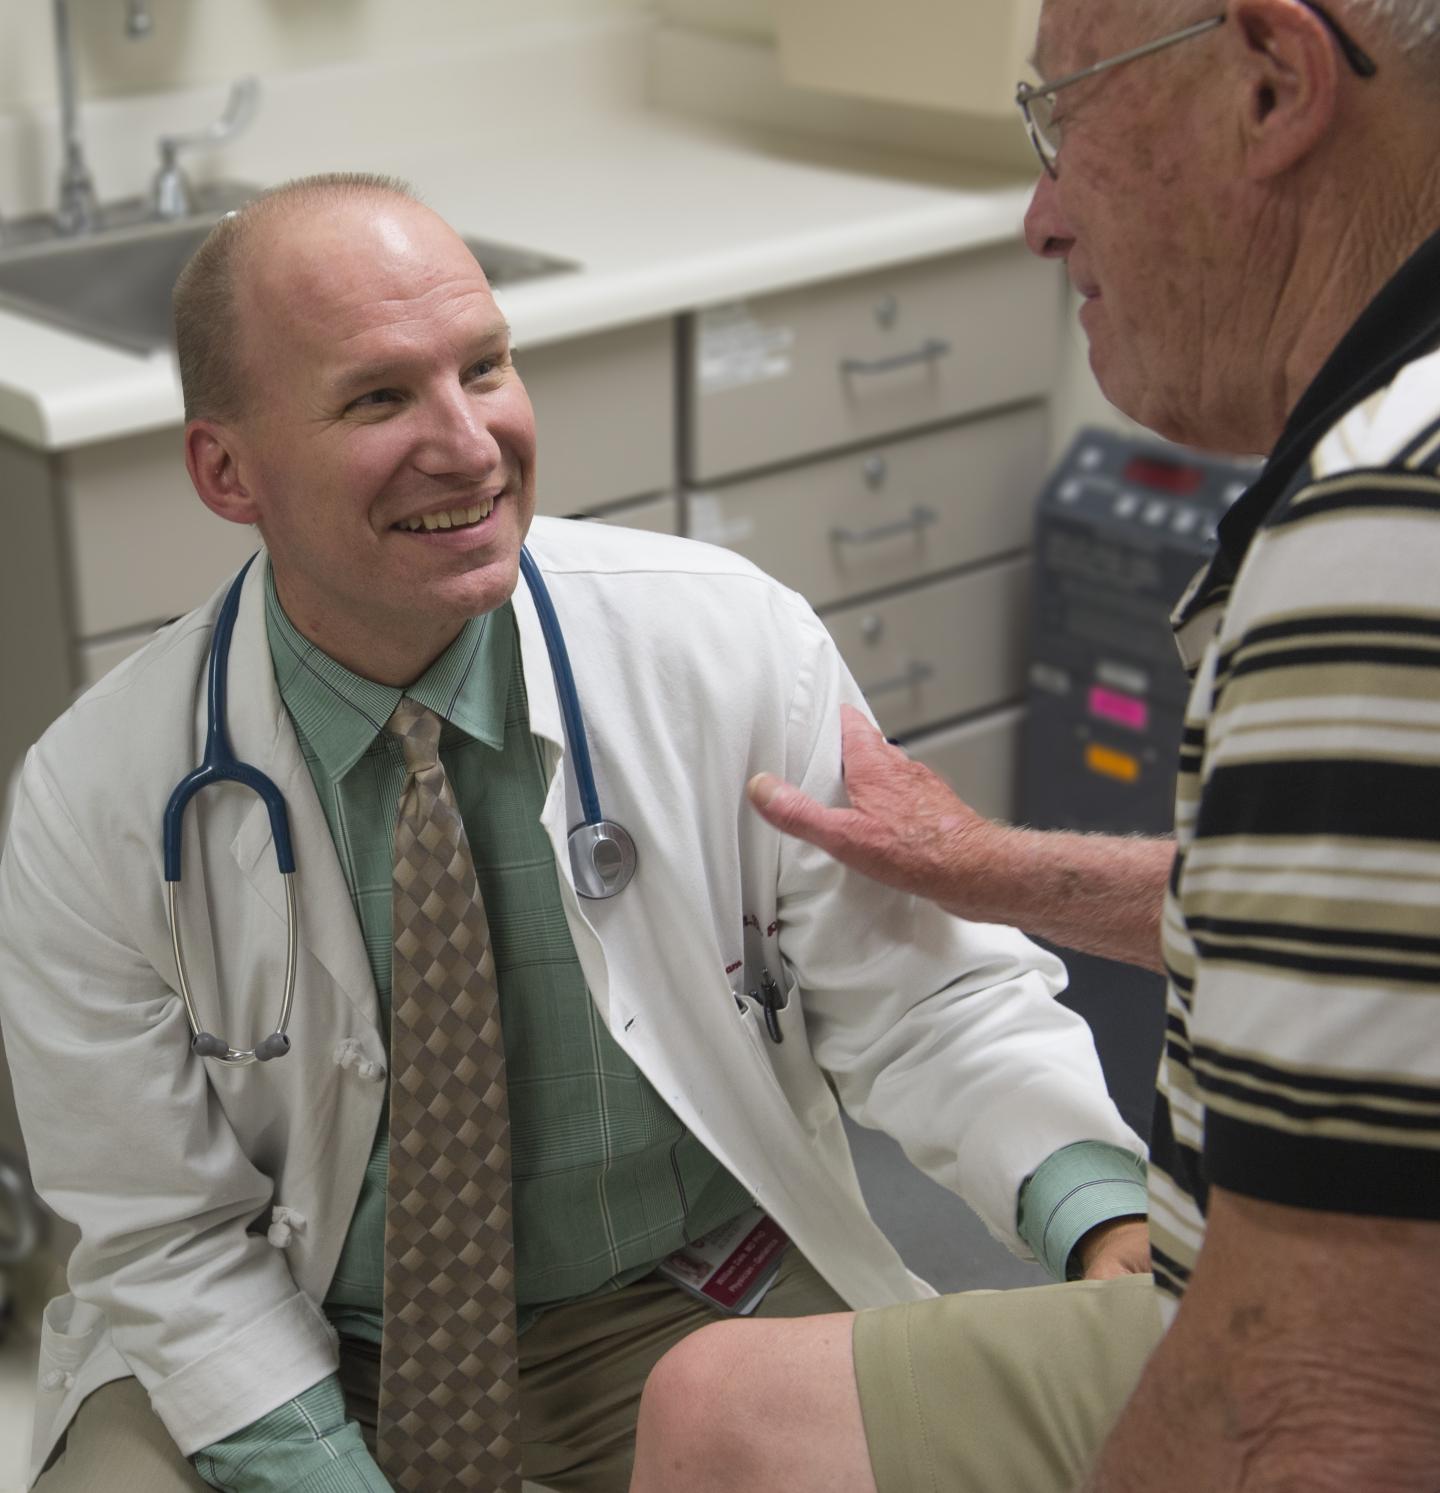 Doctor's Work Helps Redefine Health, Well-Being in Aging US Population